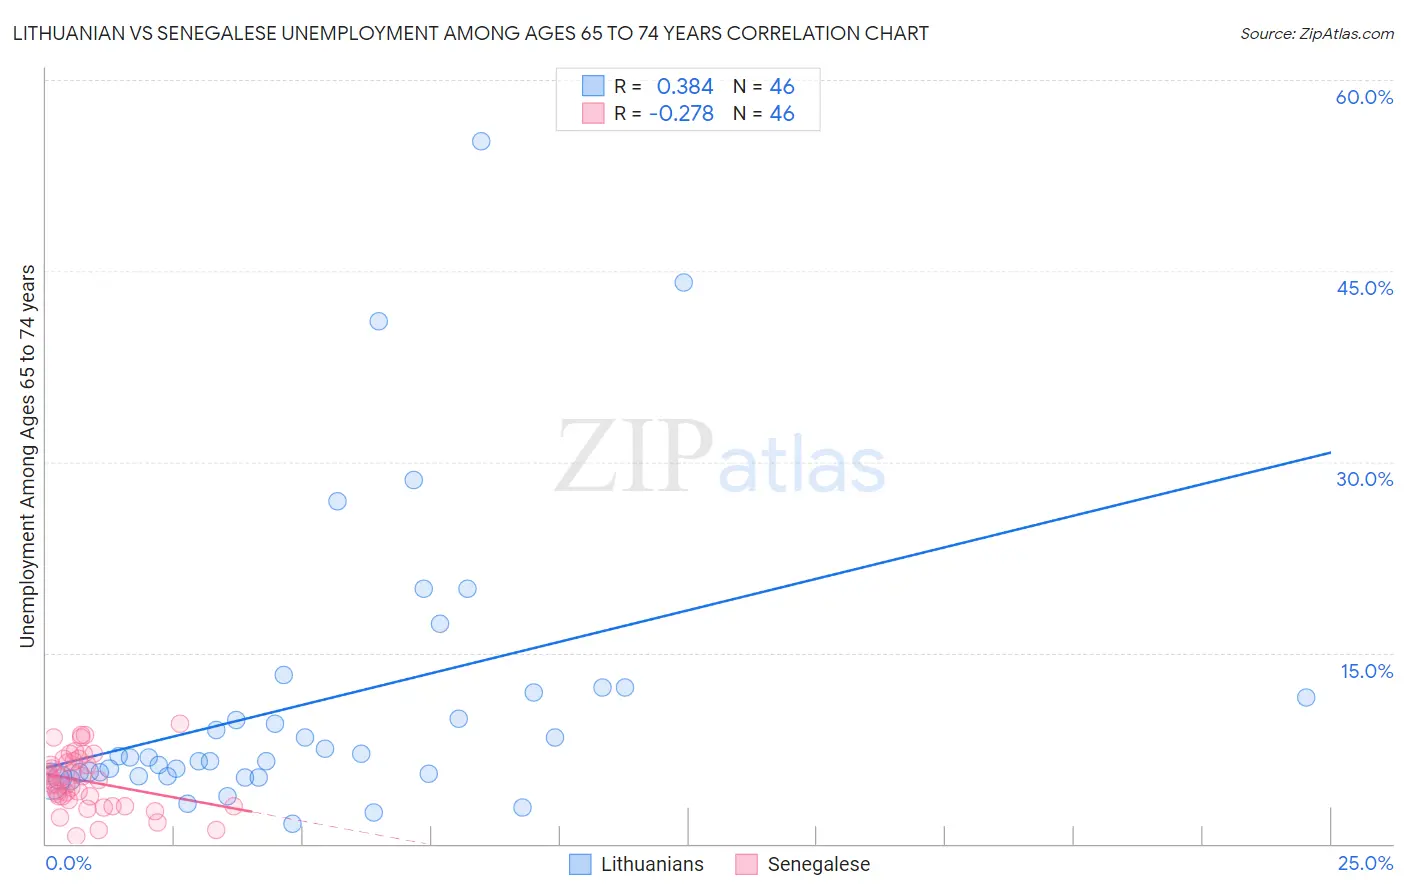 Lithuanian vs Senegalese Unemployment Among Ages 65 to 74 years